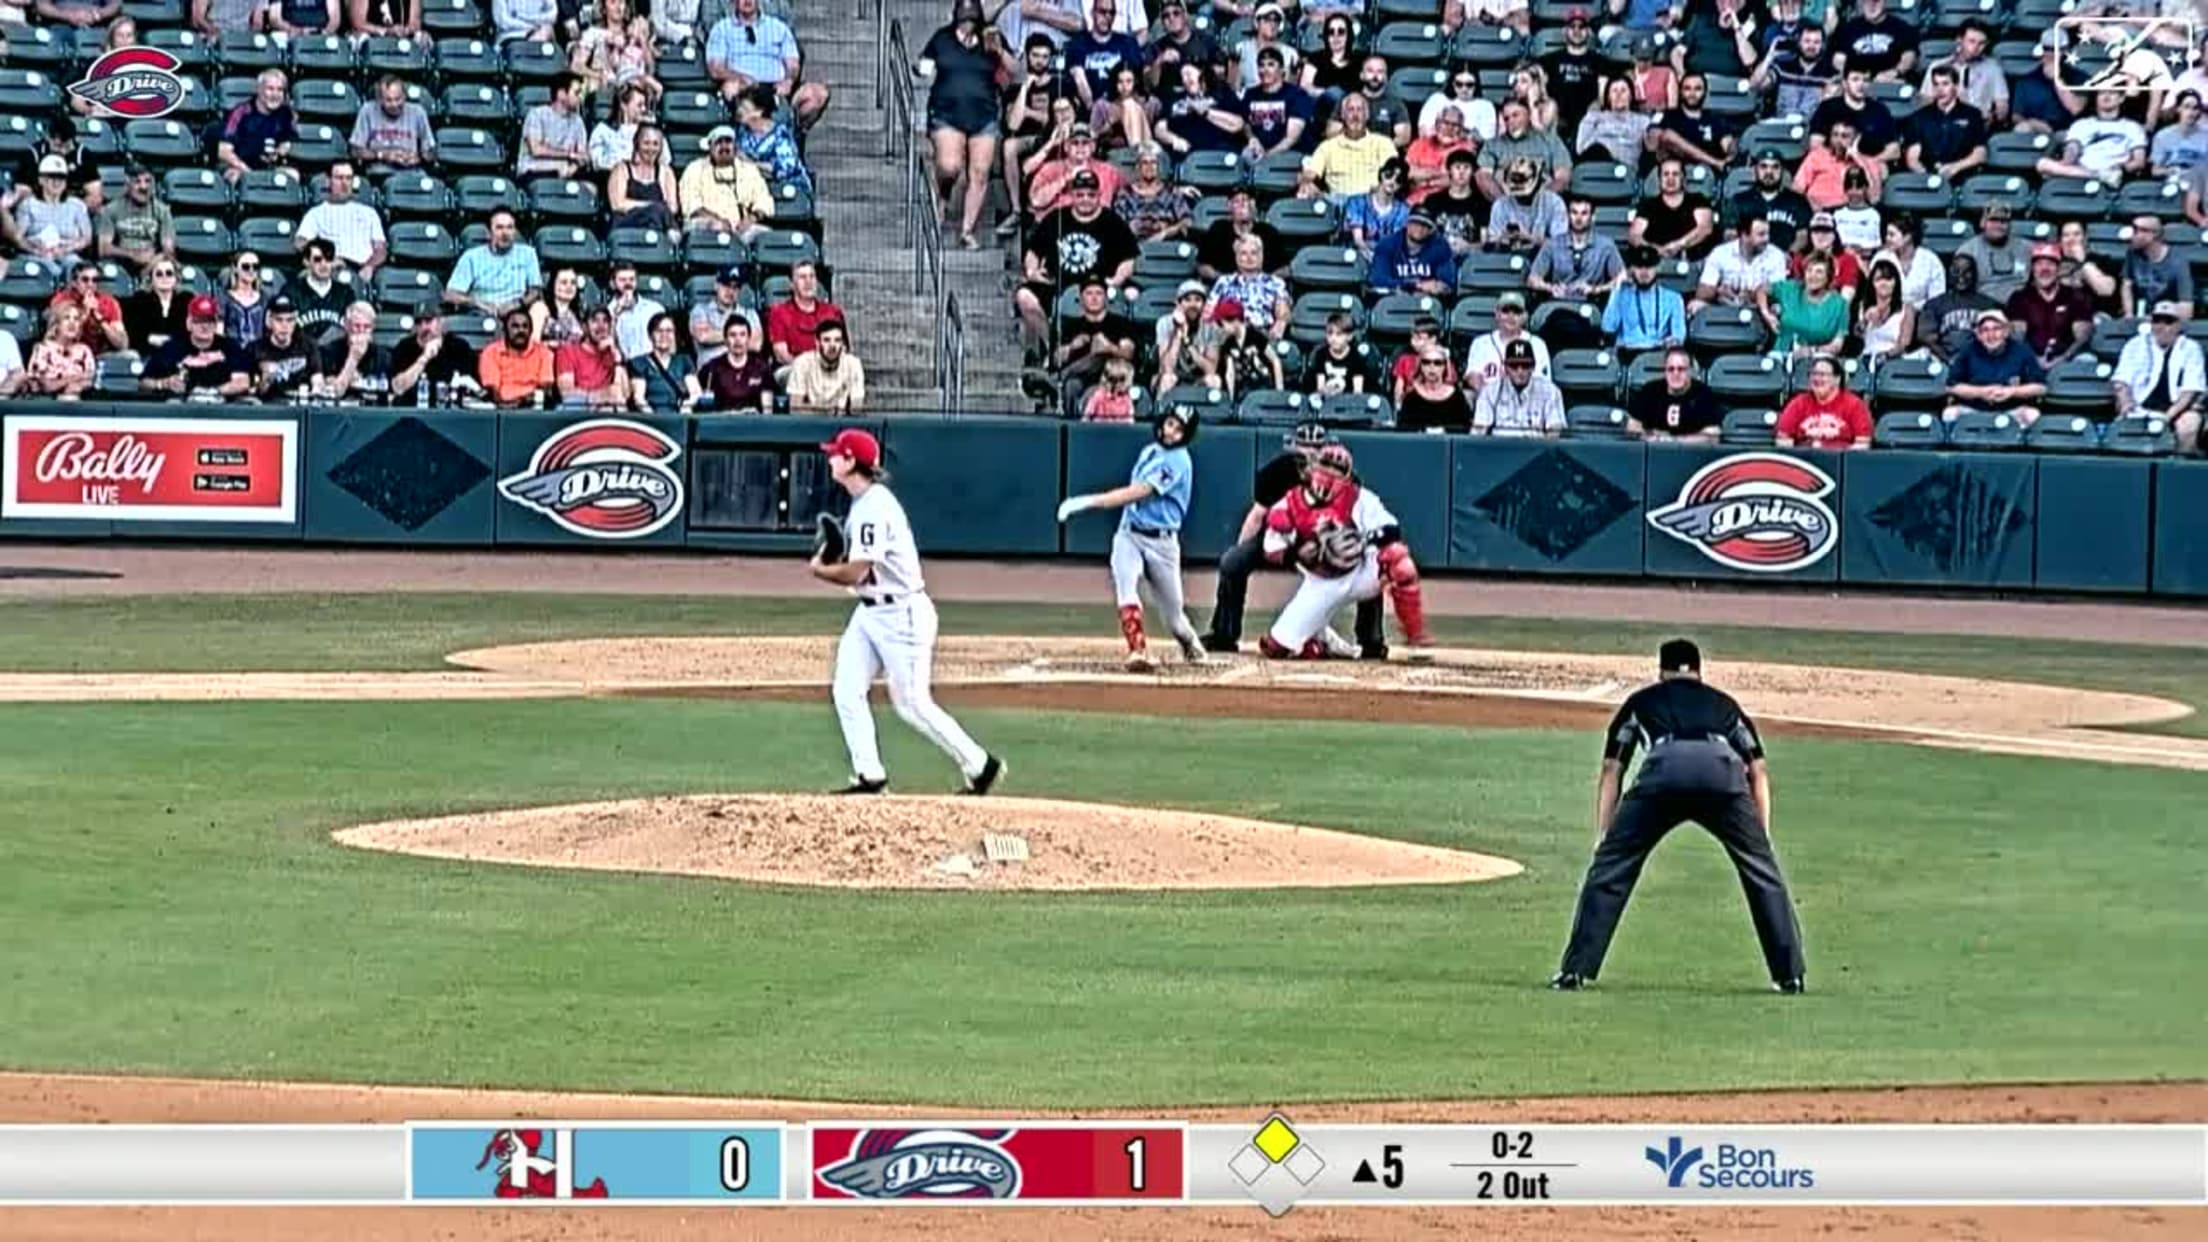 Isaac Coffey's eighth strikeout 